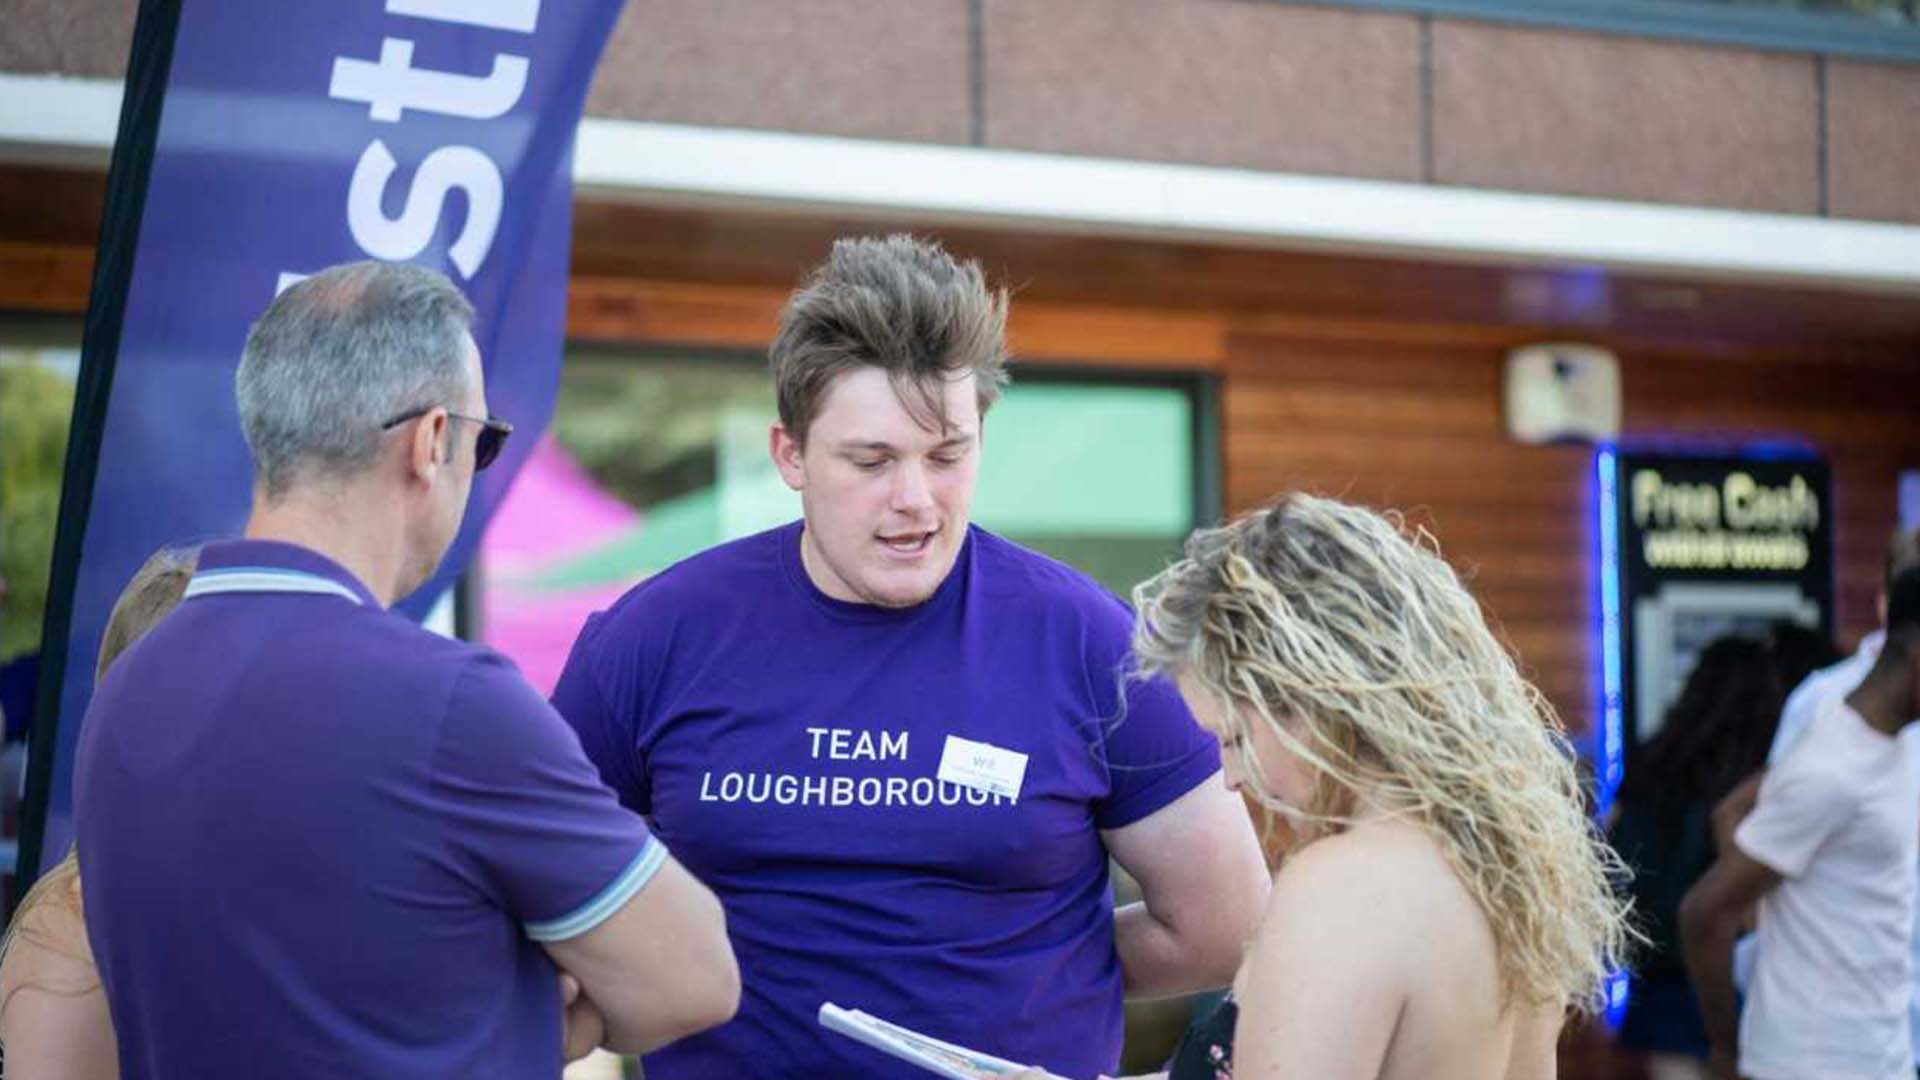 A Student Ambassador talking to visitors at a Loughborough University open day.